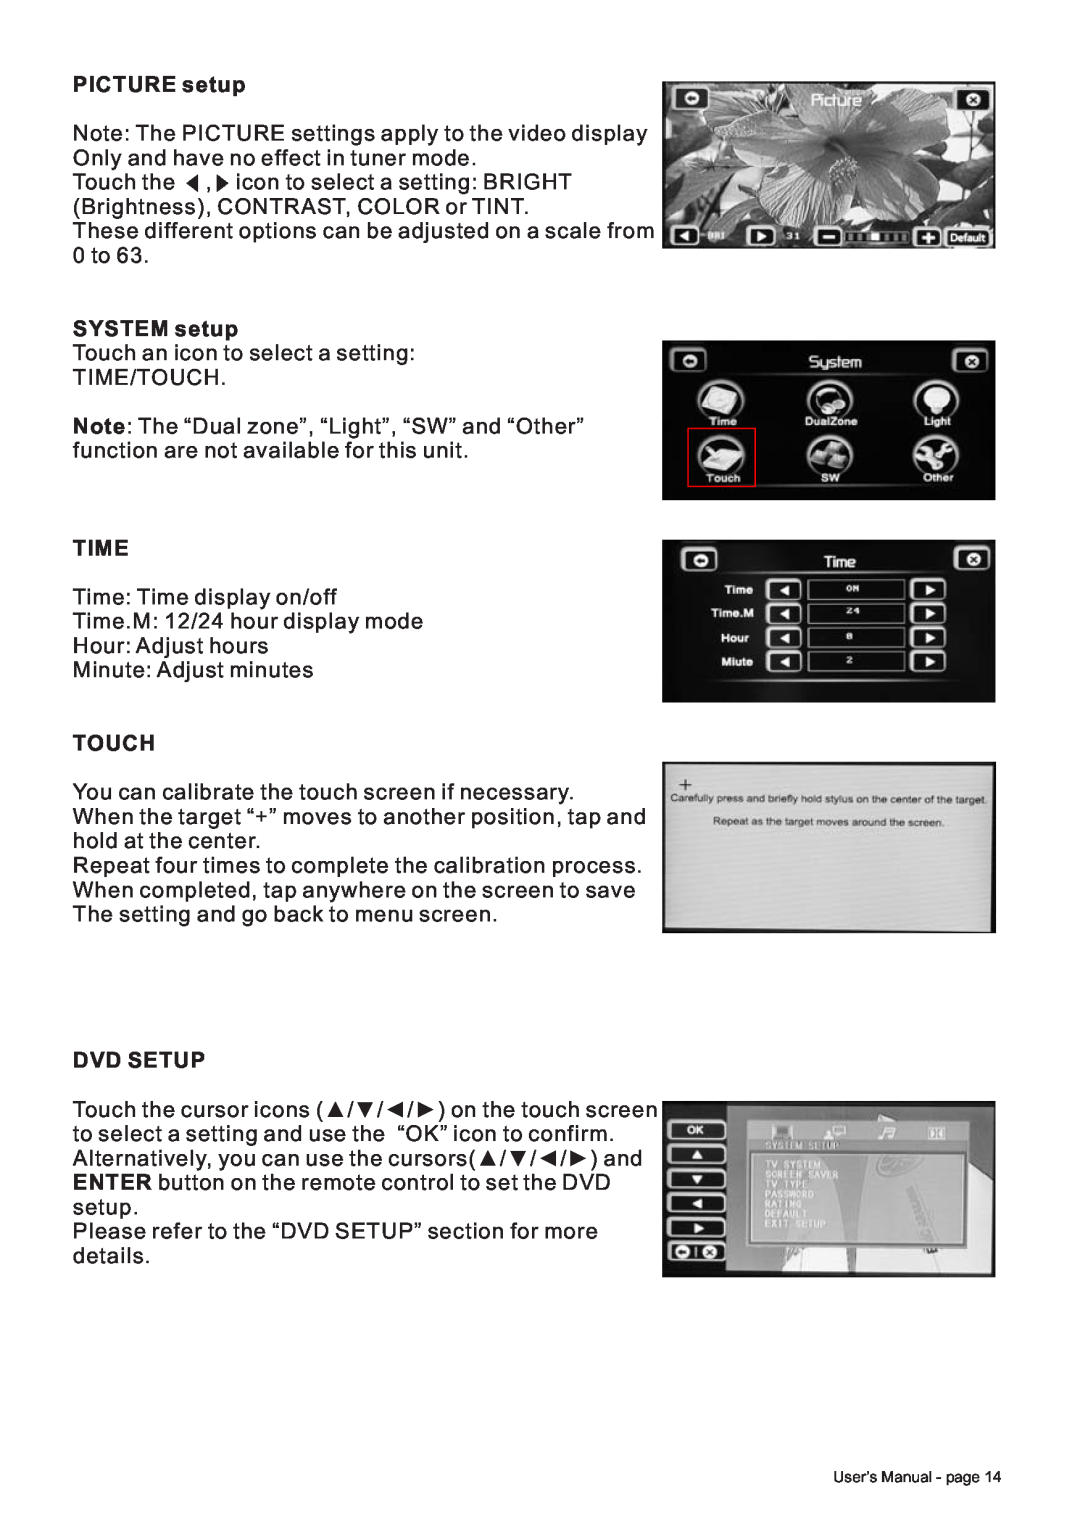 Boss Audio Systems BV8728B manual PICTURE setup, SYSTEM setup, Time, Touch, Dvd Setup 